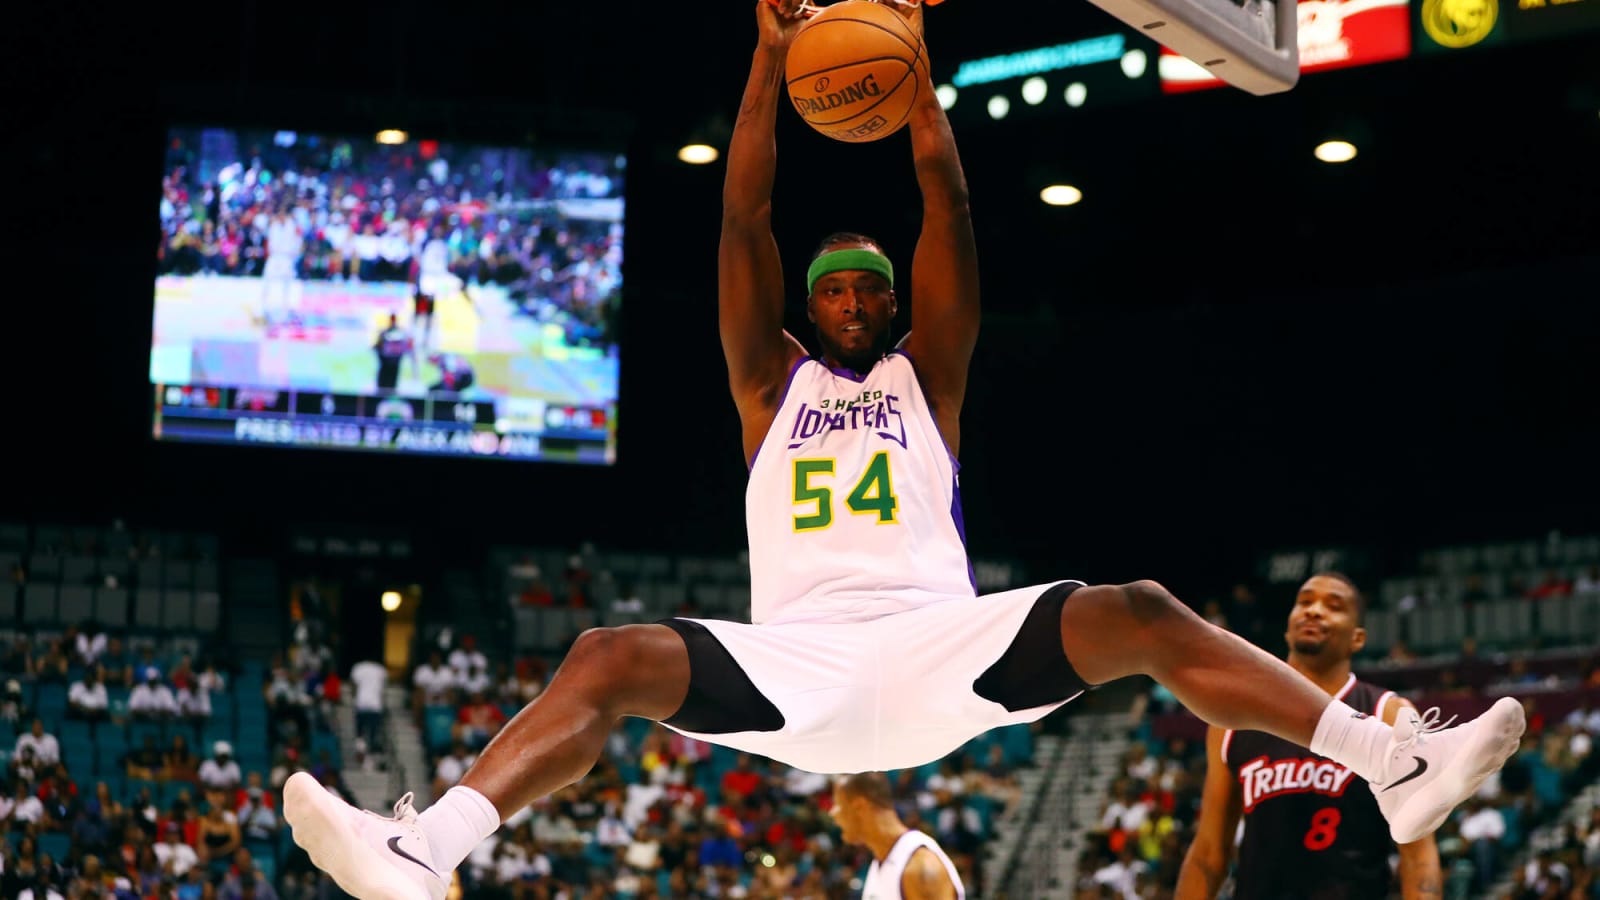 Kwame Brown Blasts Gilbert Arenas: "He’s What’s Wrong With Our Community"